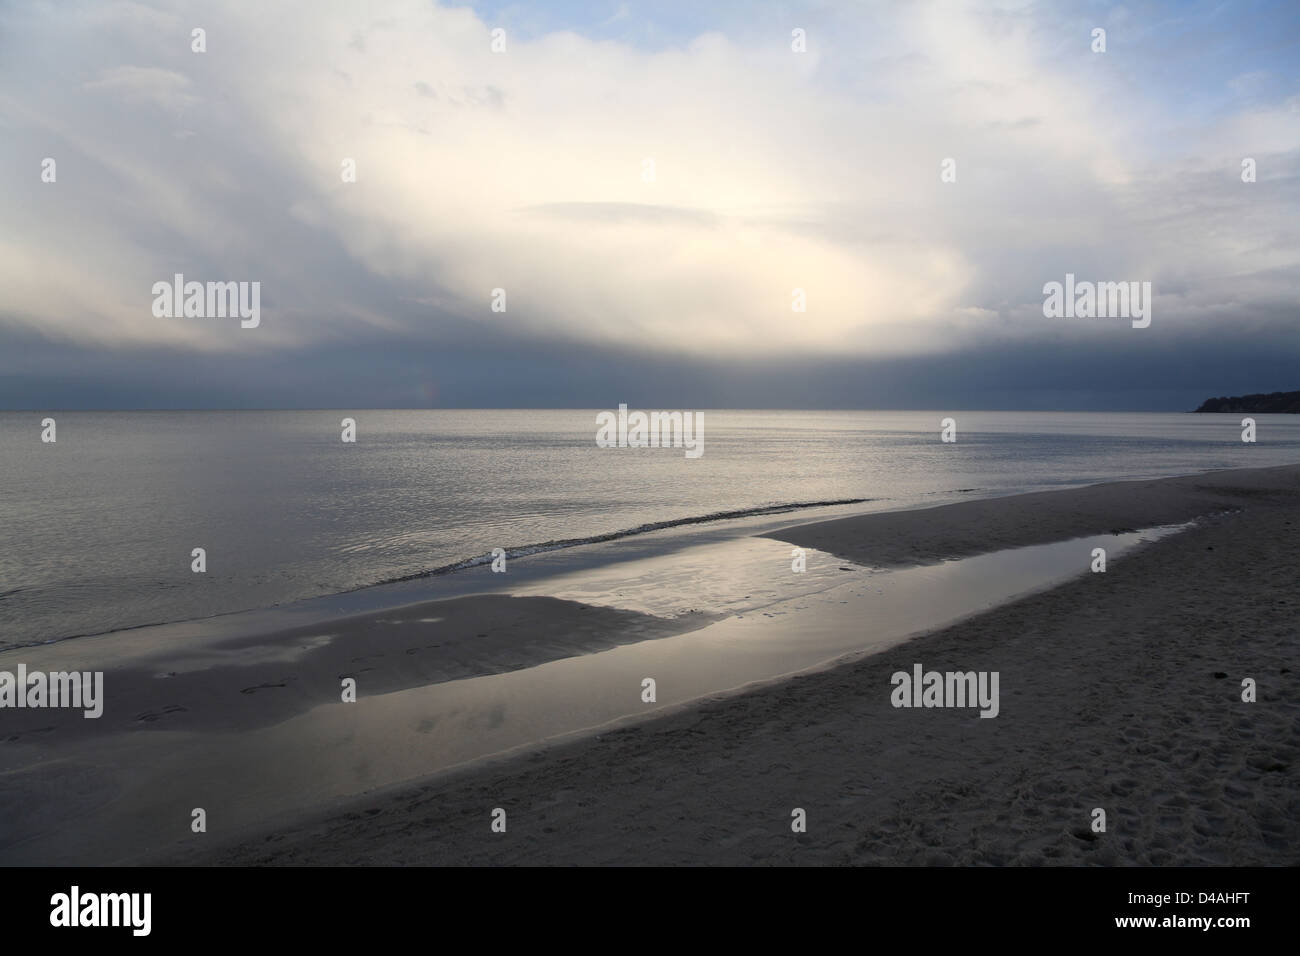 Baabe, Germany, view over the beach of the Baltic Sea on the island of Ruegen Stock Photo